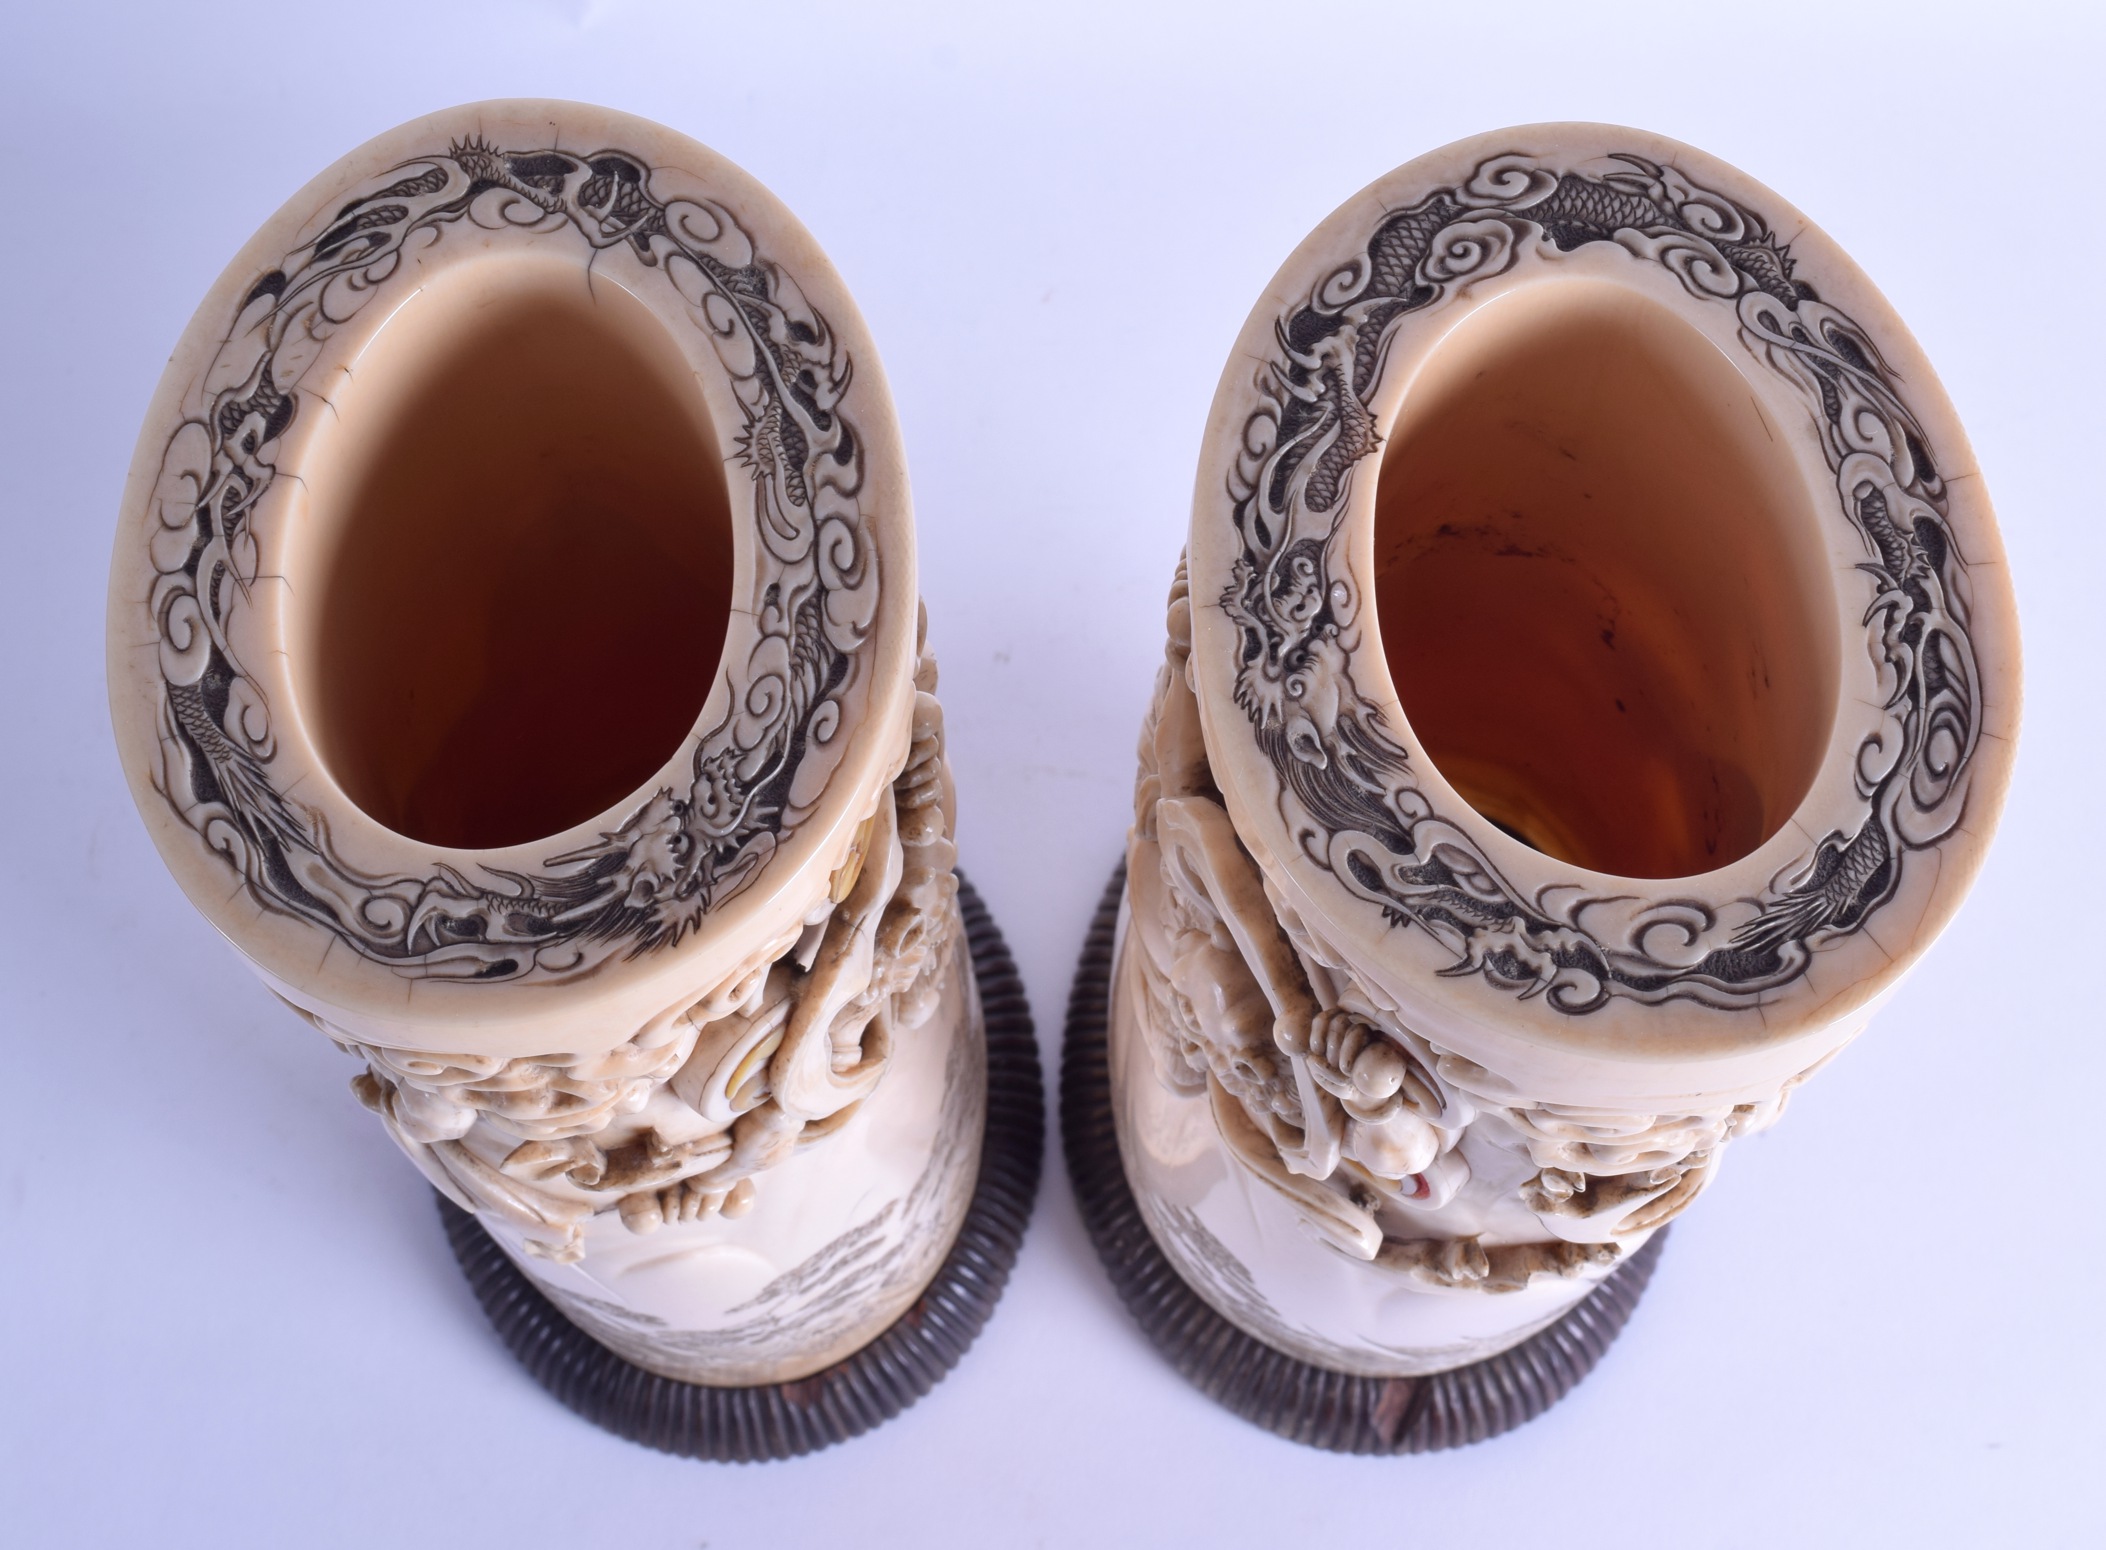 A FINE LARGE PAIR OF 19TH CENTURY JAPANESE MEIJI PERIOD CARVED IVORY TUSK VASES decorated in - Image 4 of 4